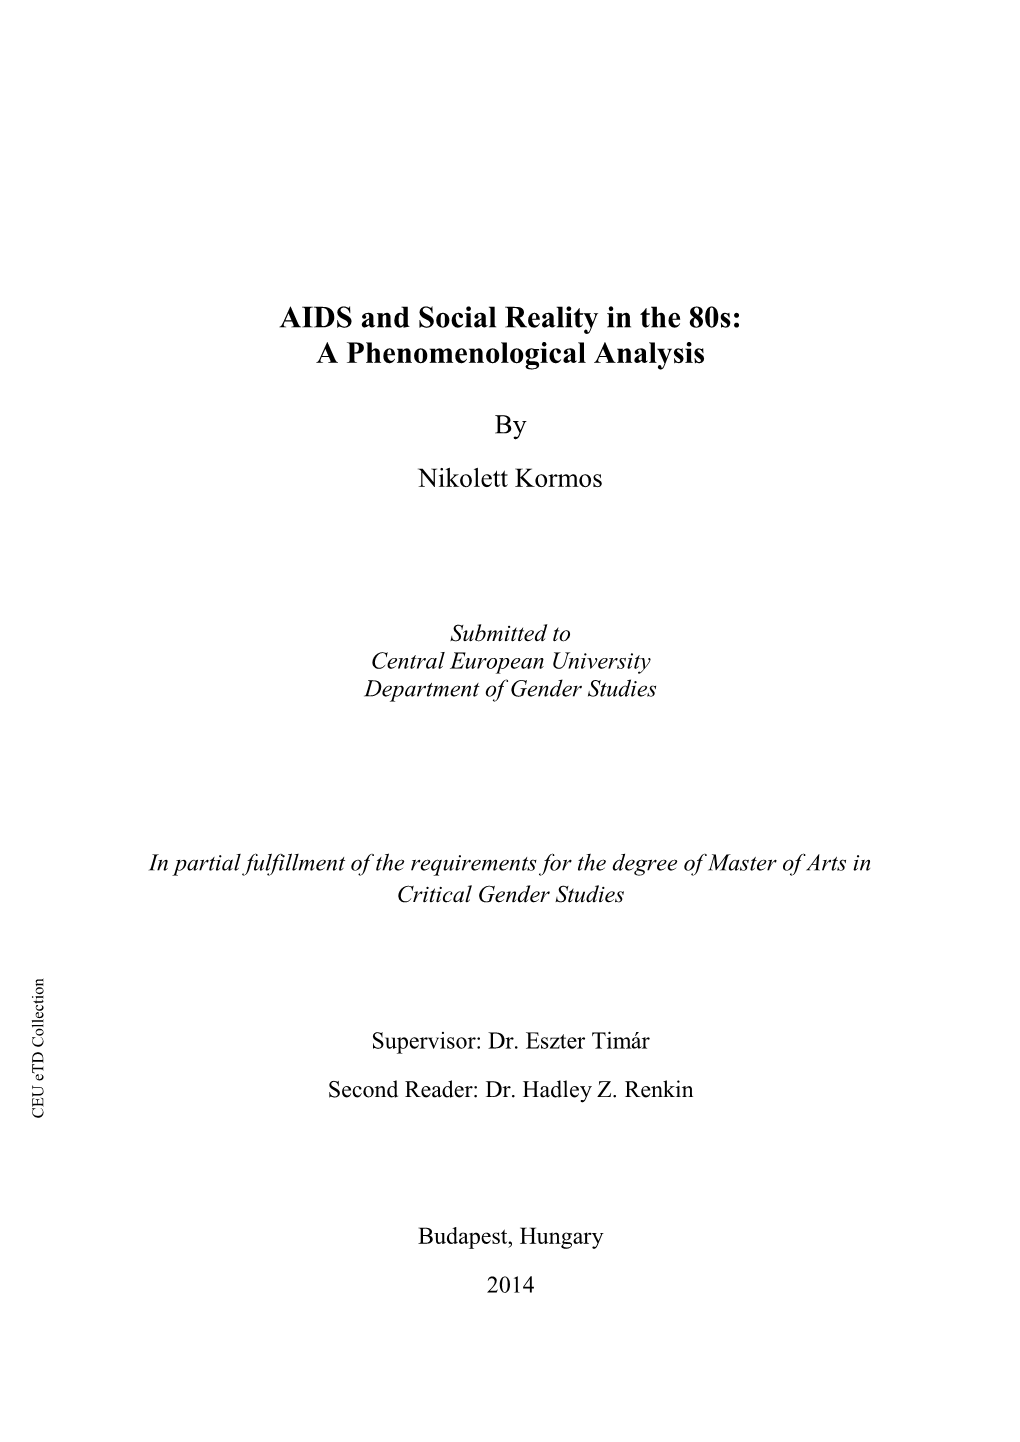 AIDS and Social Reality in The